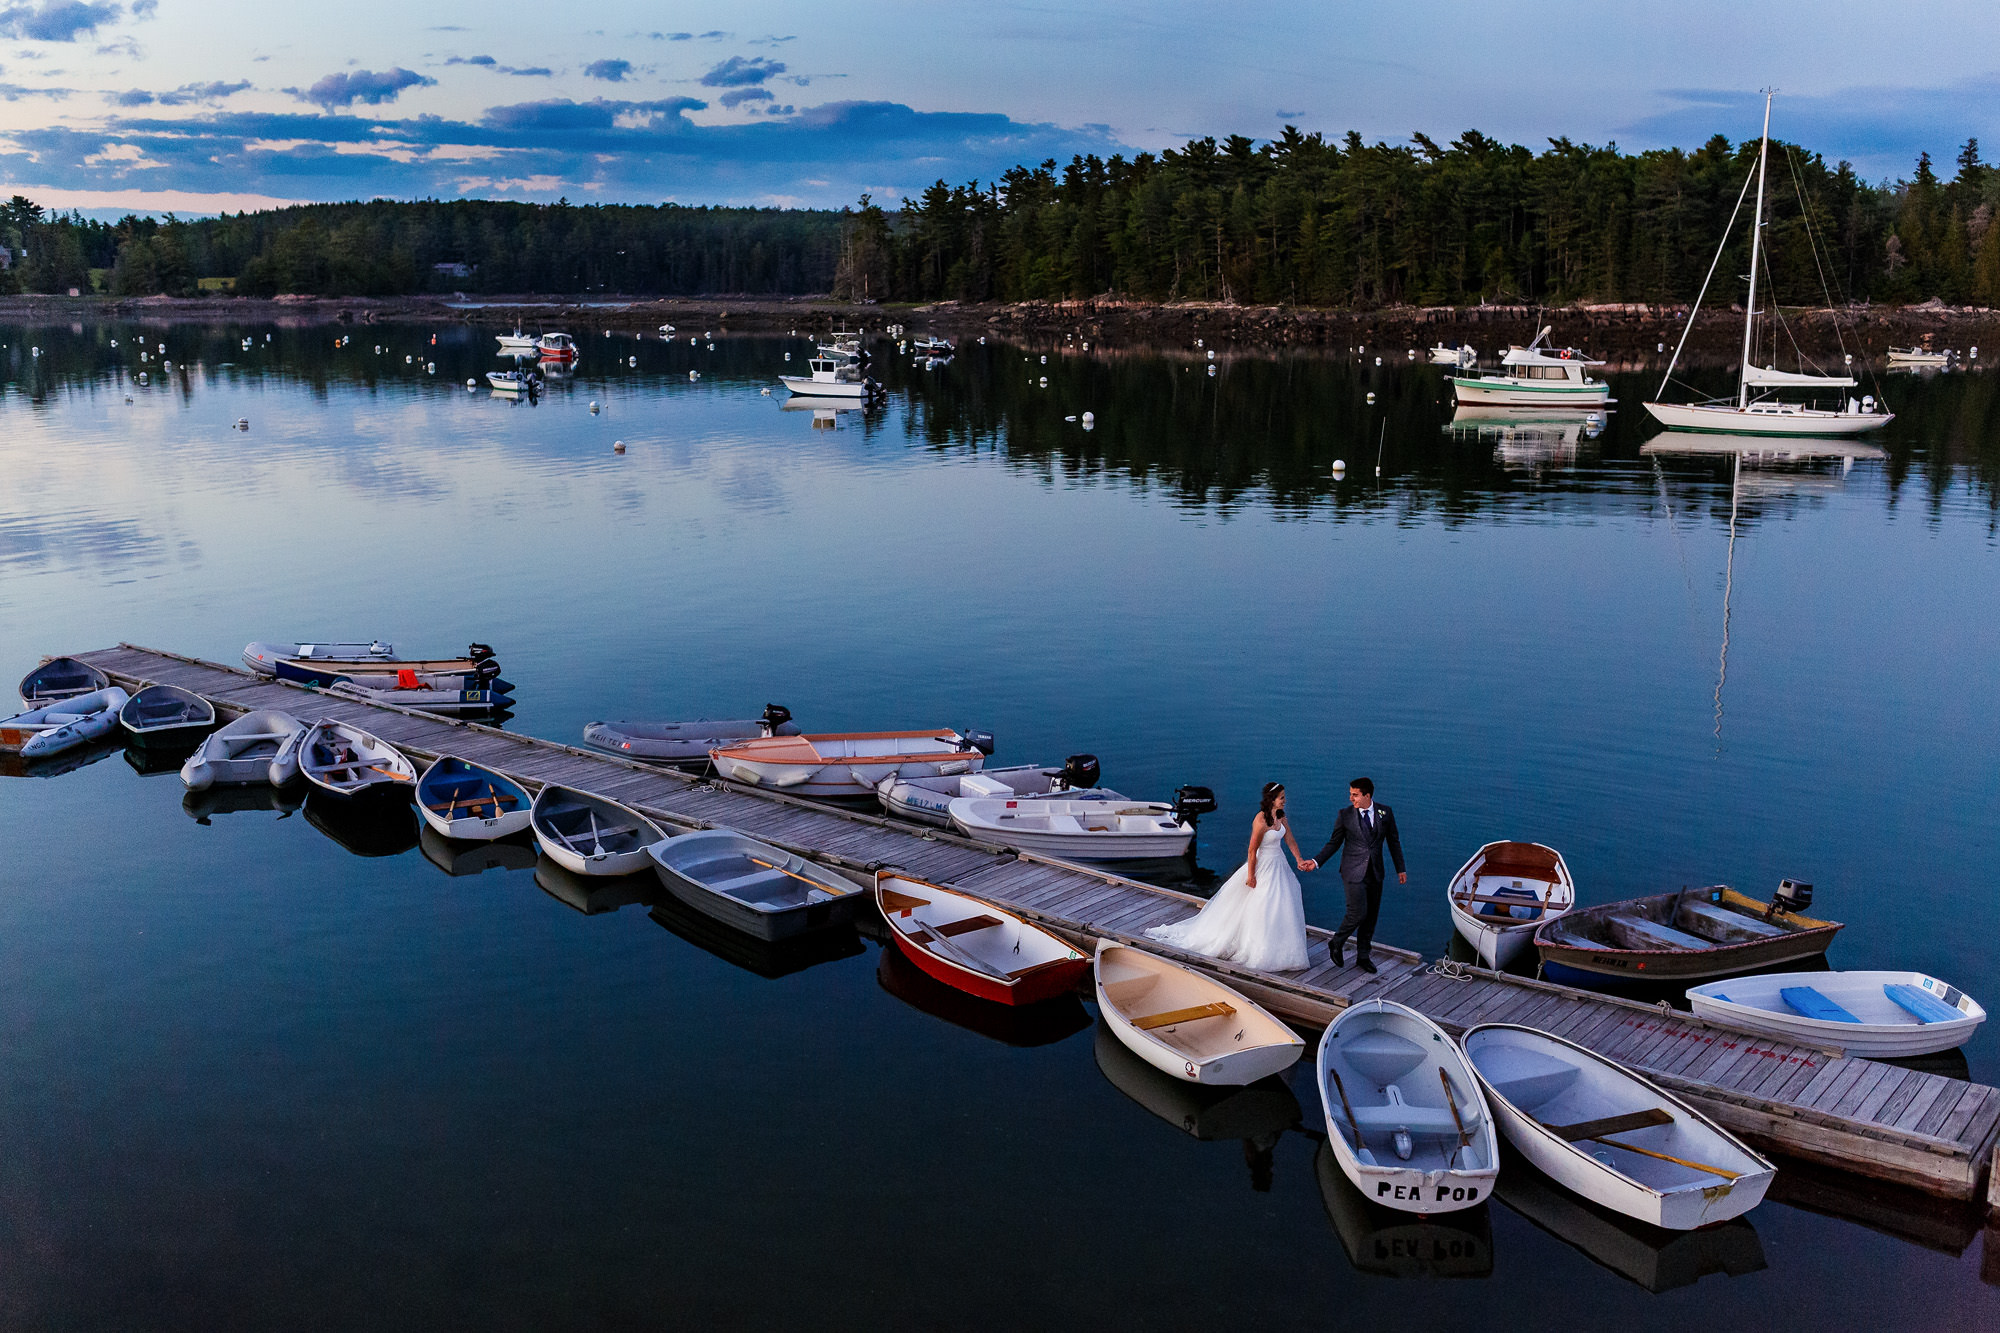 A bride and groom walk on a dock at twilight at their Maine wedding.